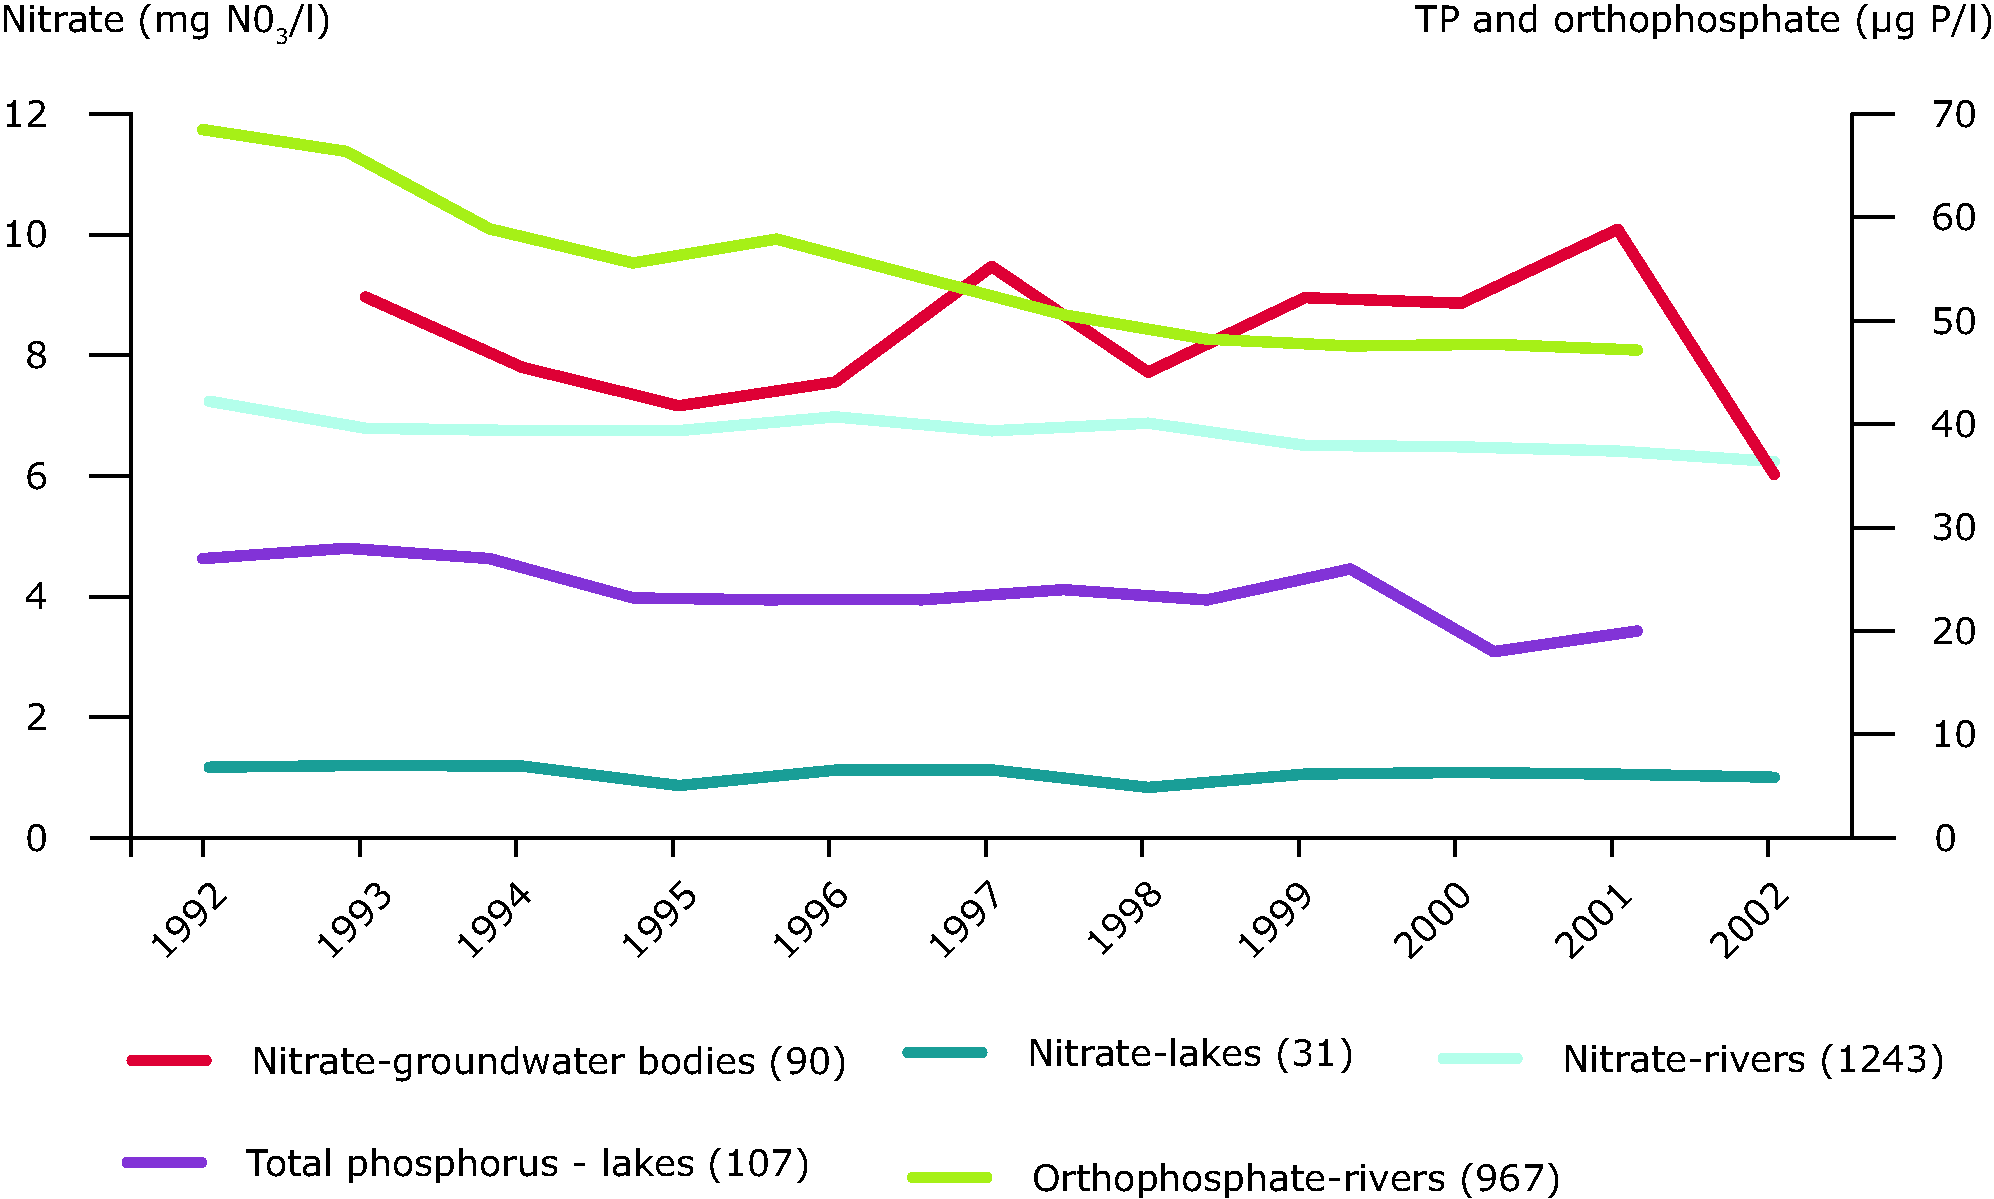 Nitrate and phosphorus concentrations in European freshwater bodies between 1992/1993 and 2002